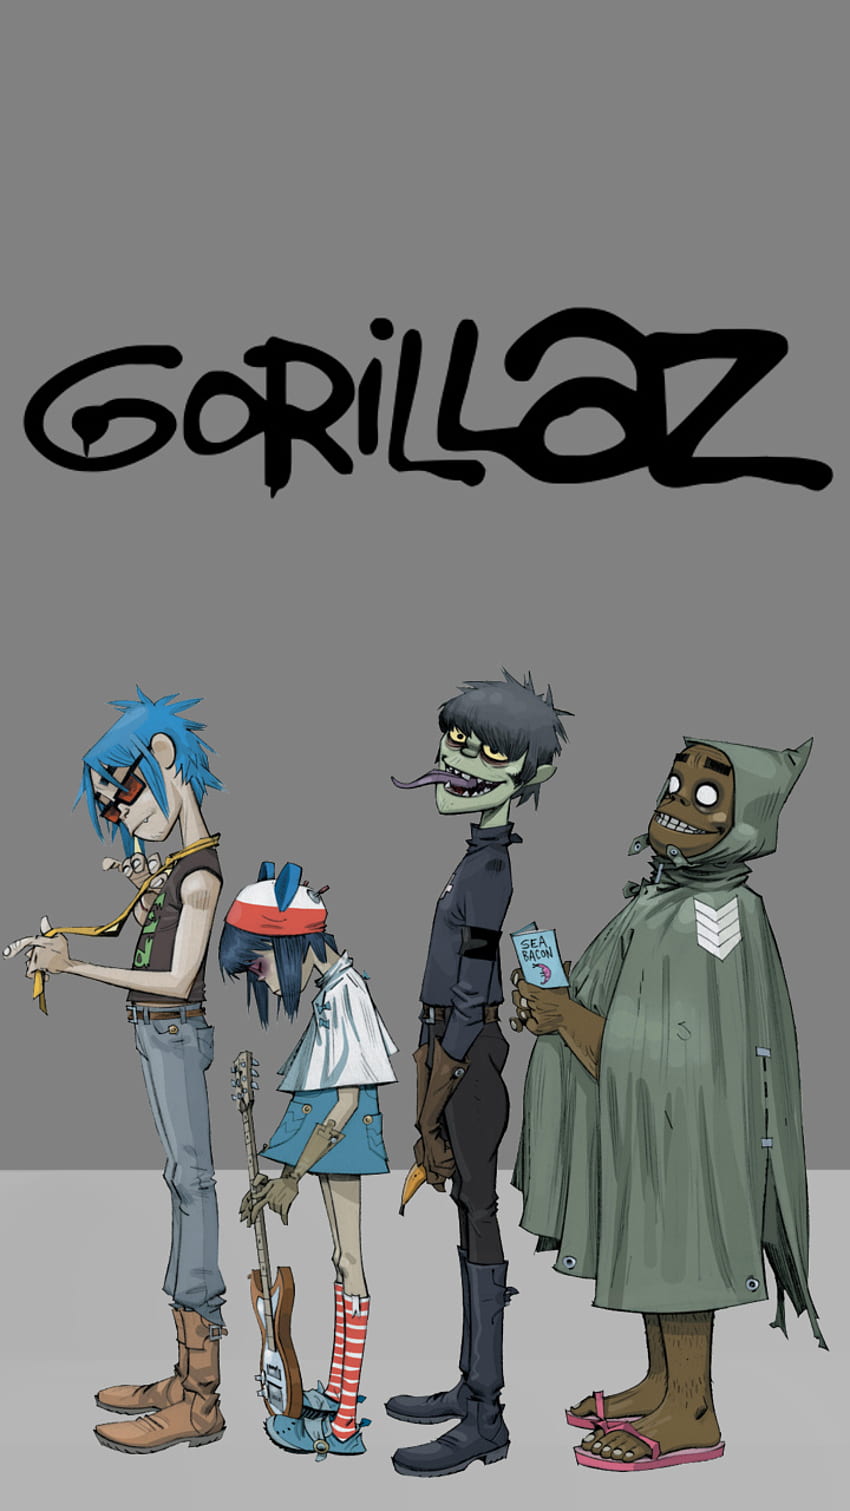 Gorillaz Wallpapers Android  Wallpaper Cave